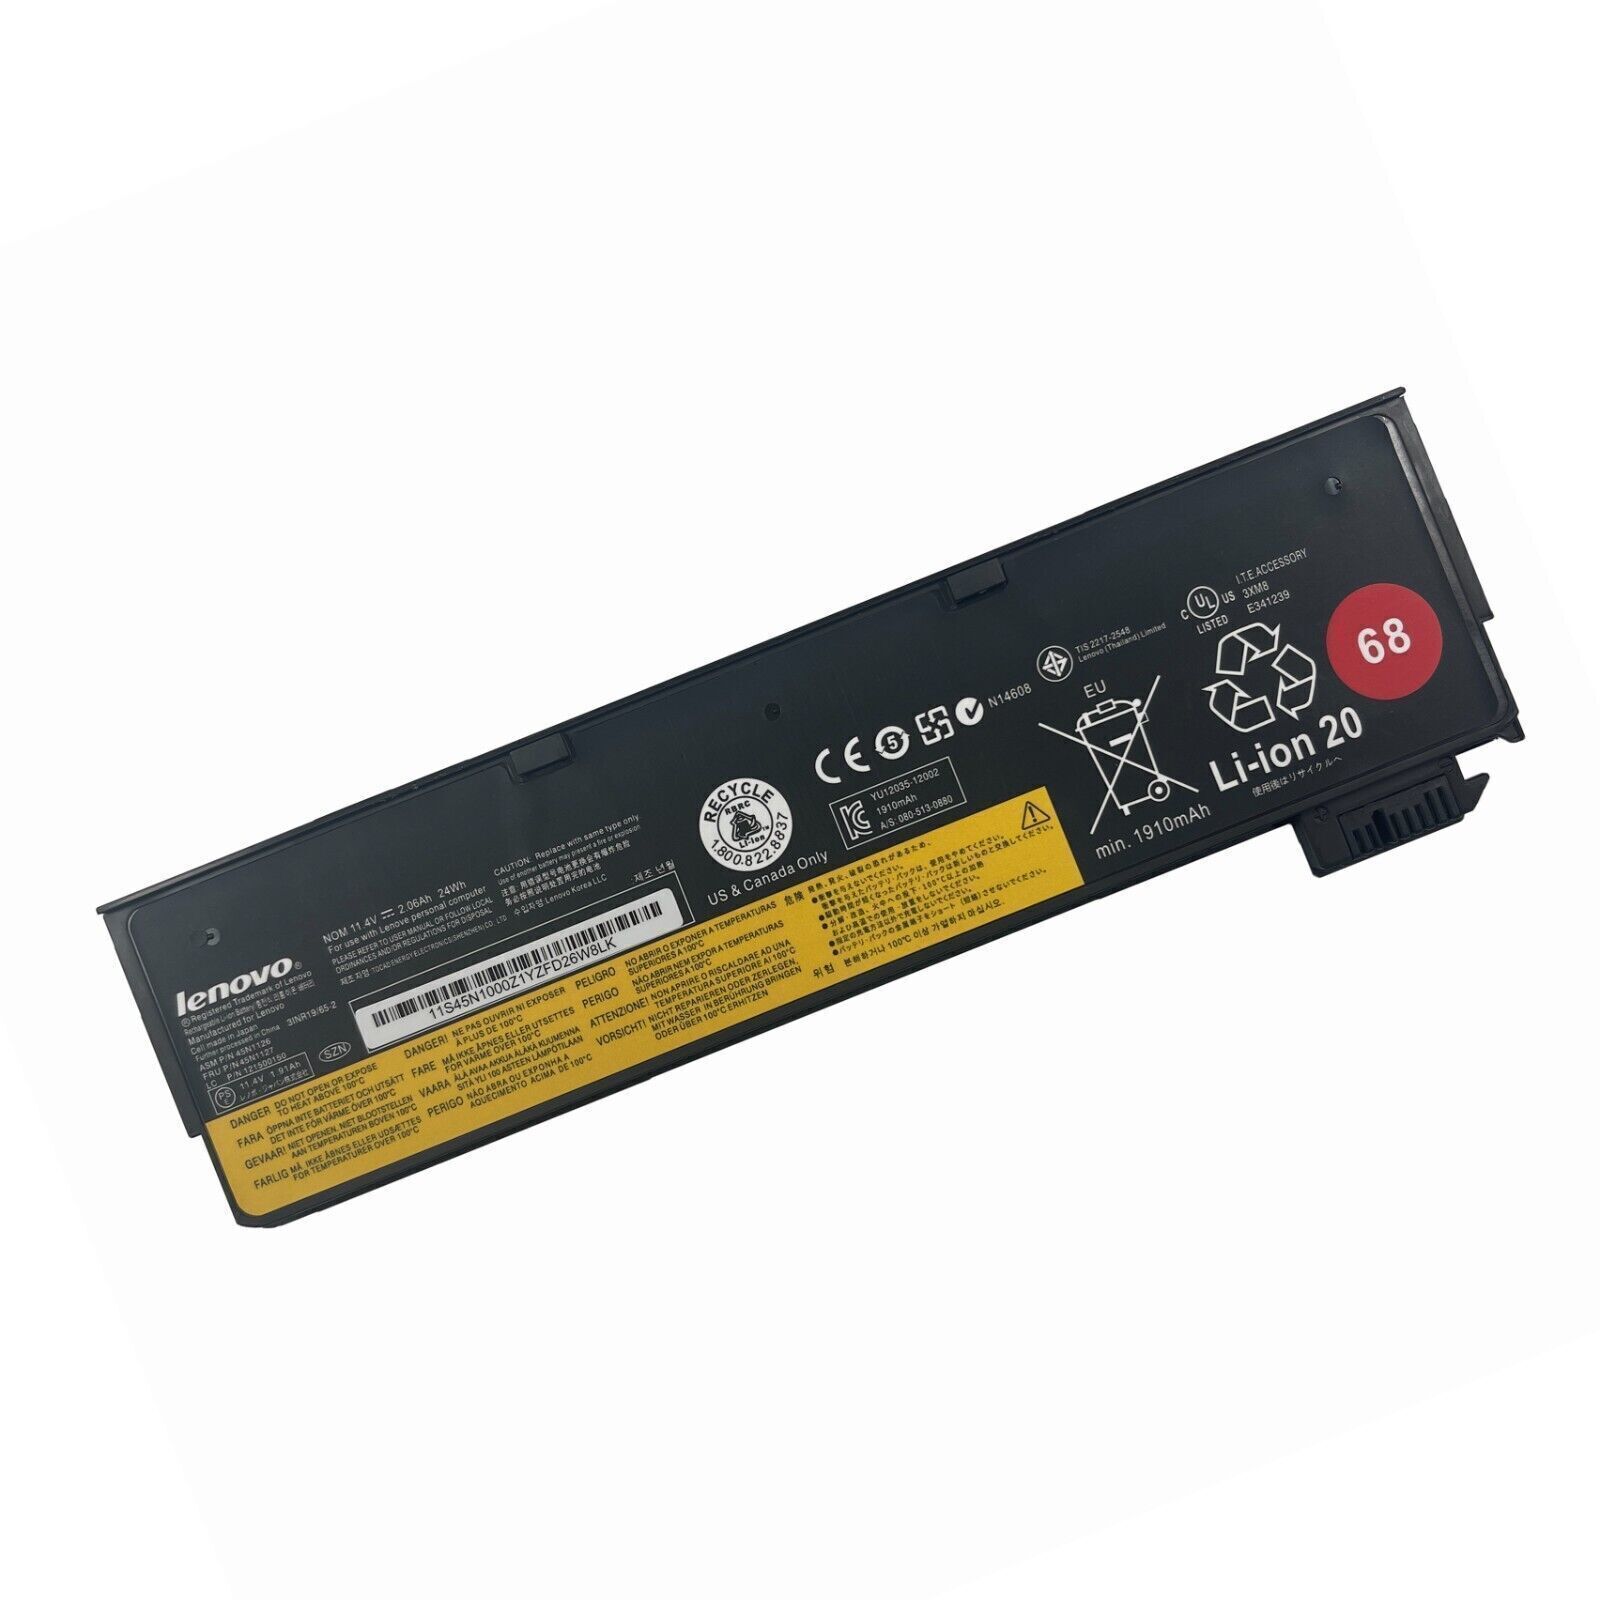 68 Genuine 24Wh Battery For Lenovo Thinkpad X240 X240s T460 T470p T550 T450 P50s